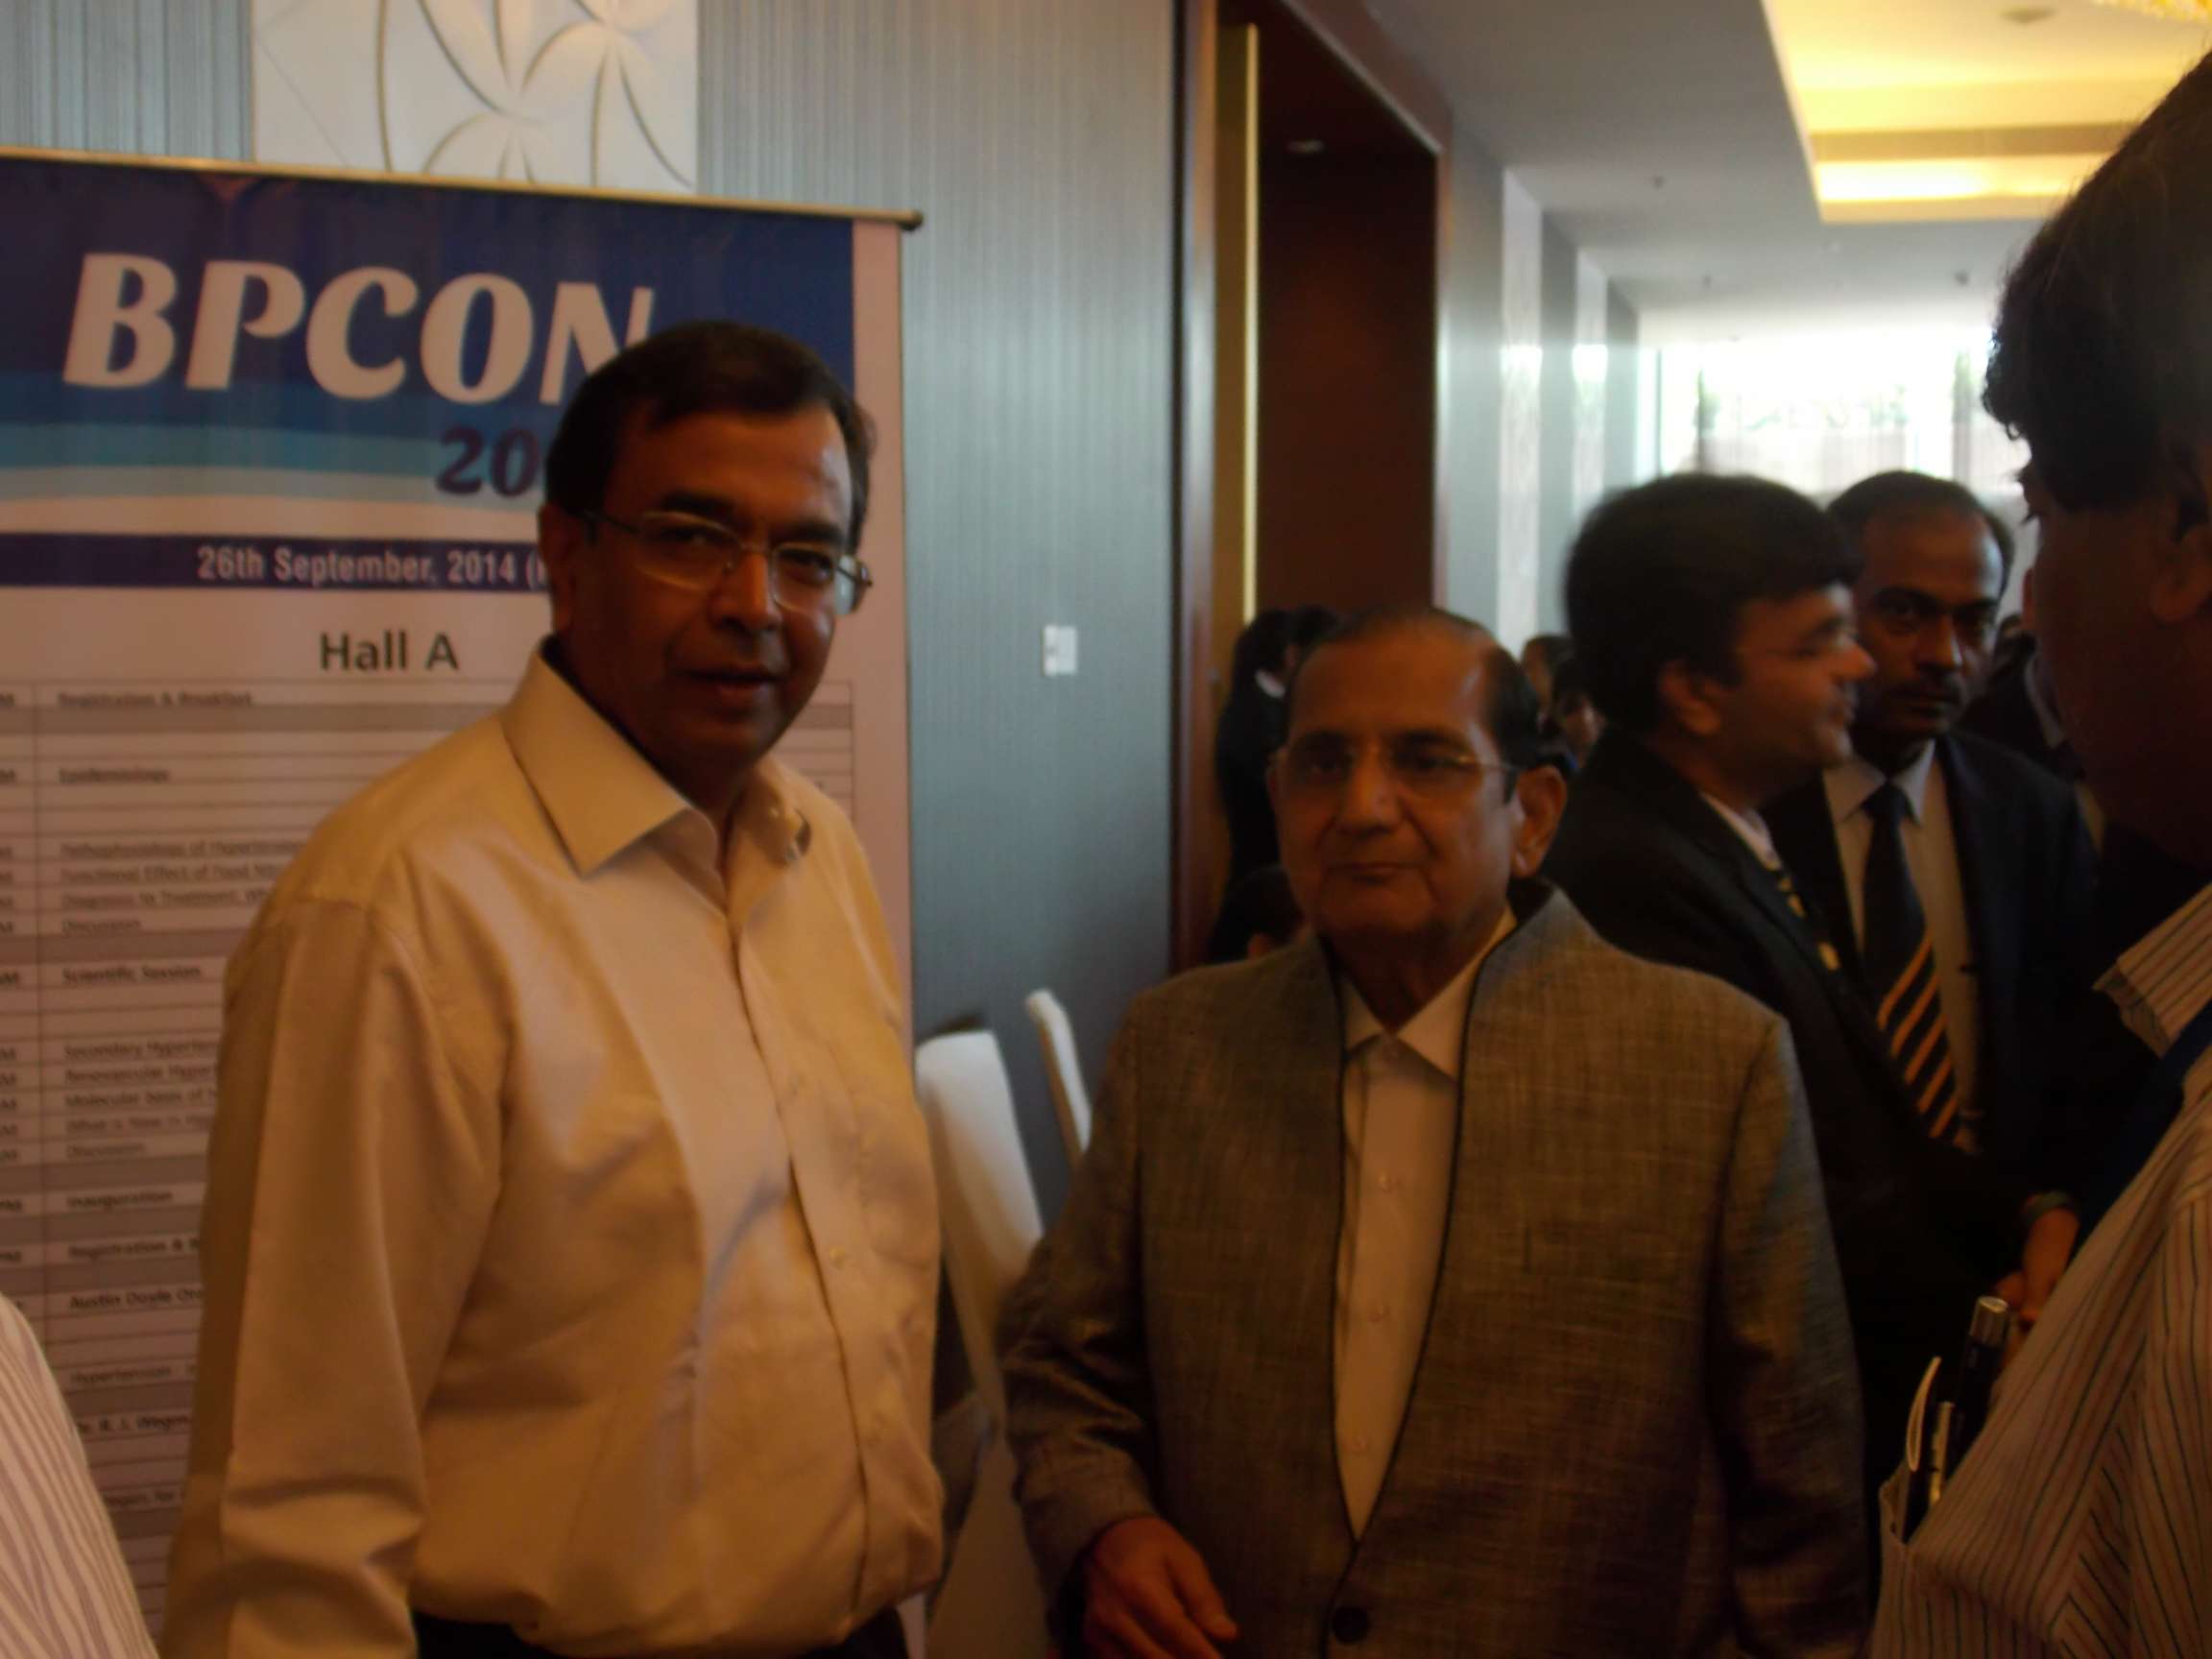 24th conference of Indian society of Hypertension - BPCON 2014